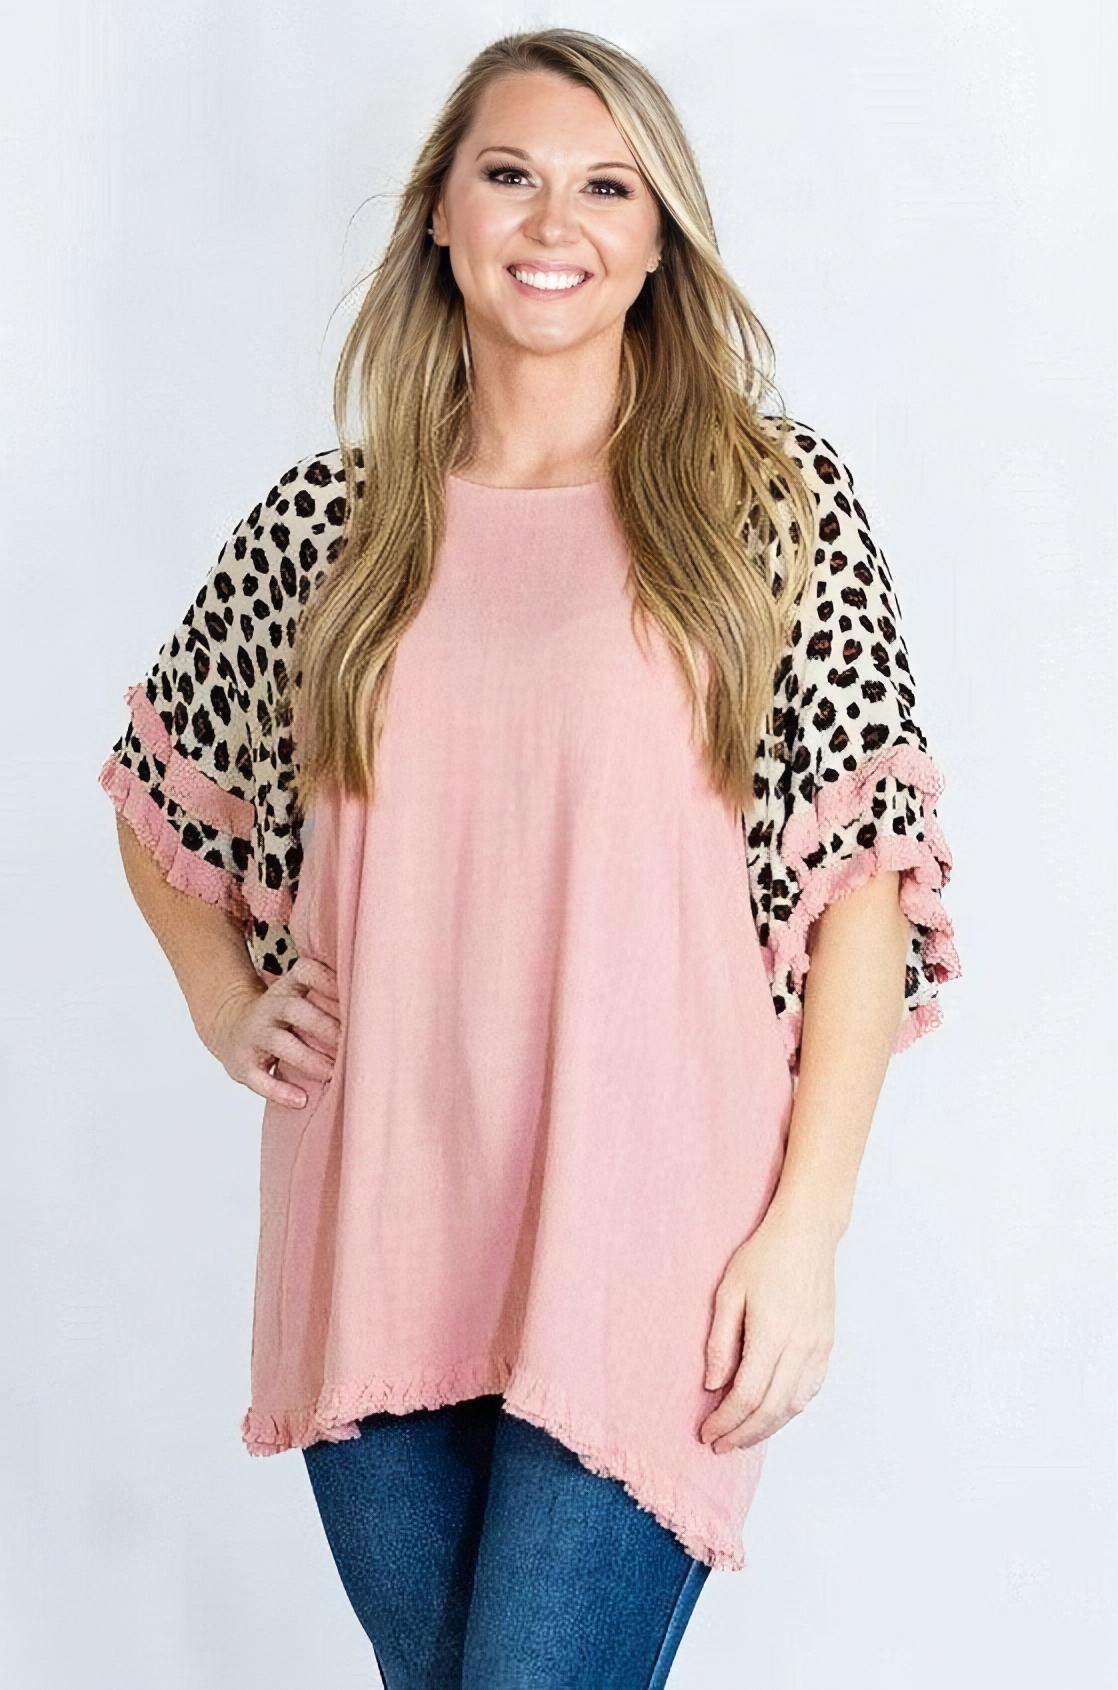 Linen Tunic Top with Animal Print Layered Bell Sleeves by Umgee Clothing